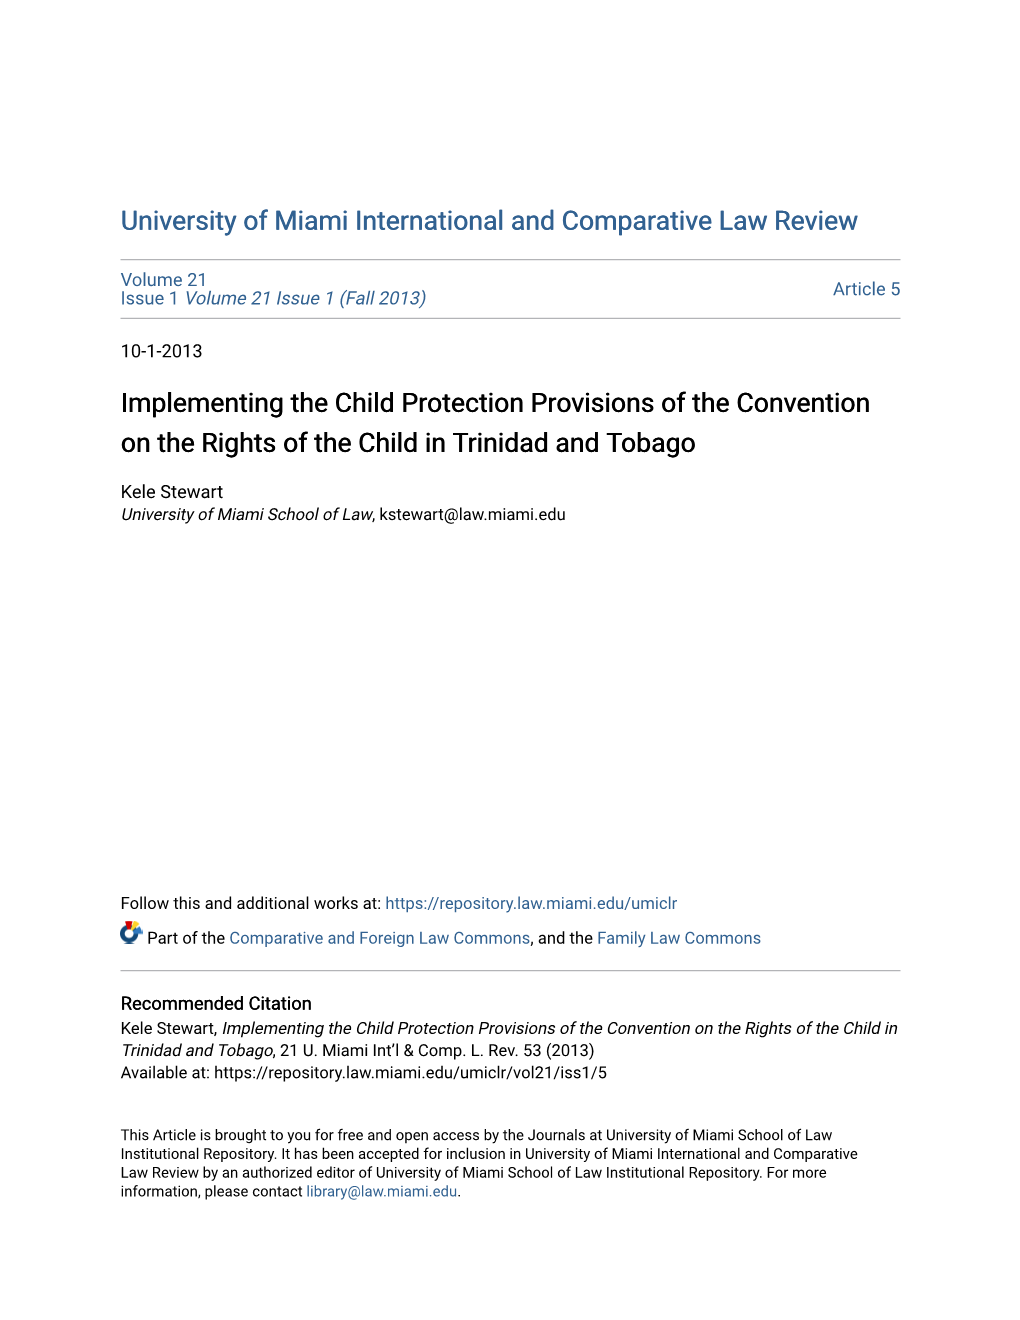 Implementing the Child Protection Provisions of the Convention on the Rights of the Child in Trinidad and Tobago